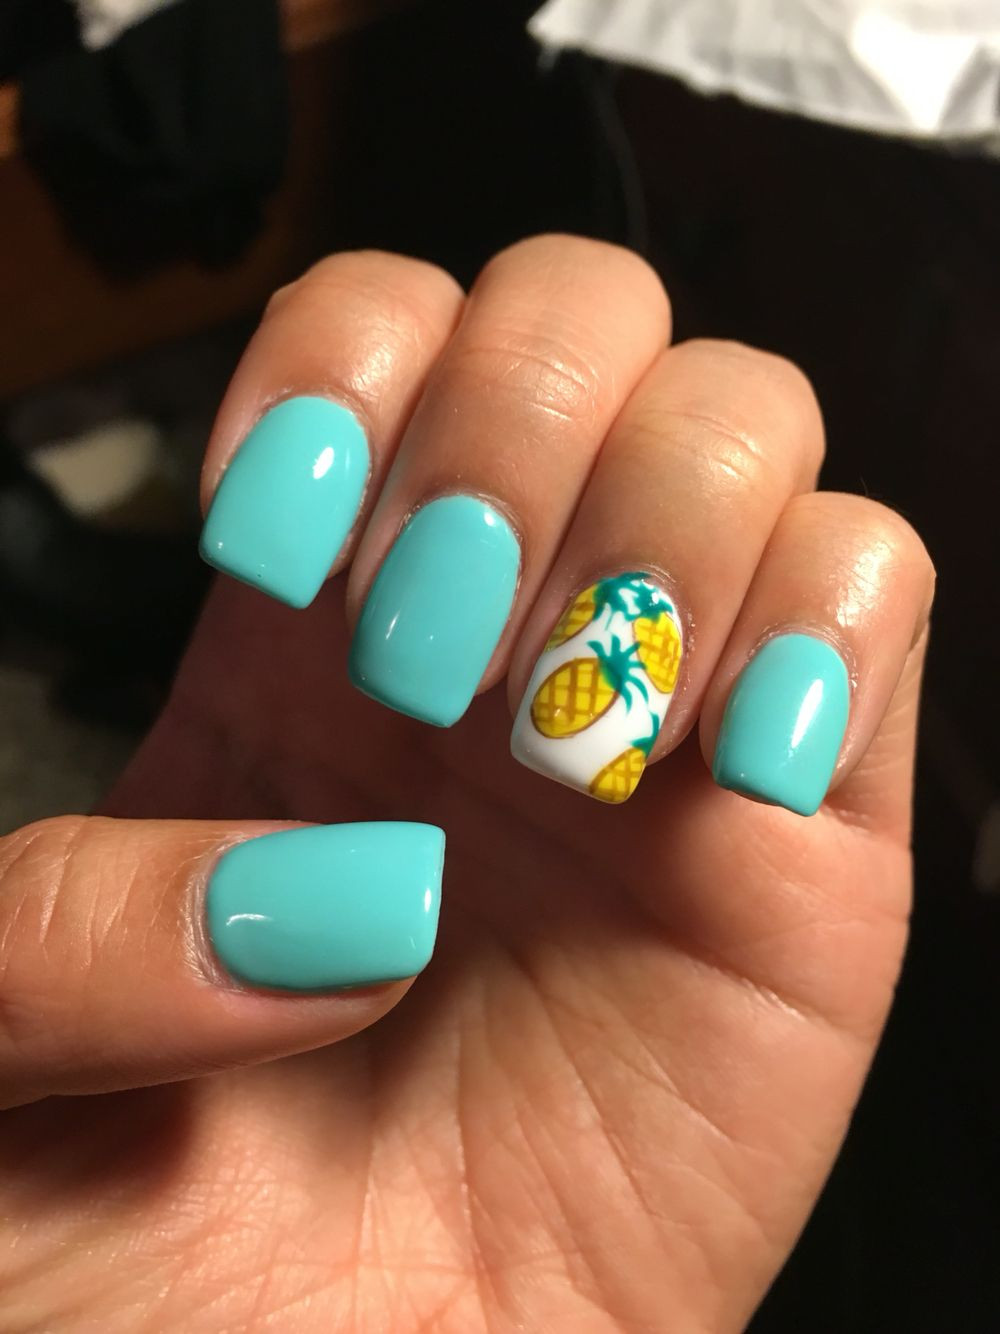 Cute Acrylic Nail Designs Summer
 Summer nails Teal acrylics with pineapples